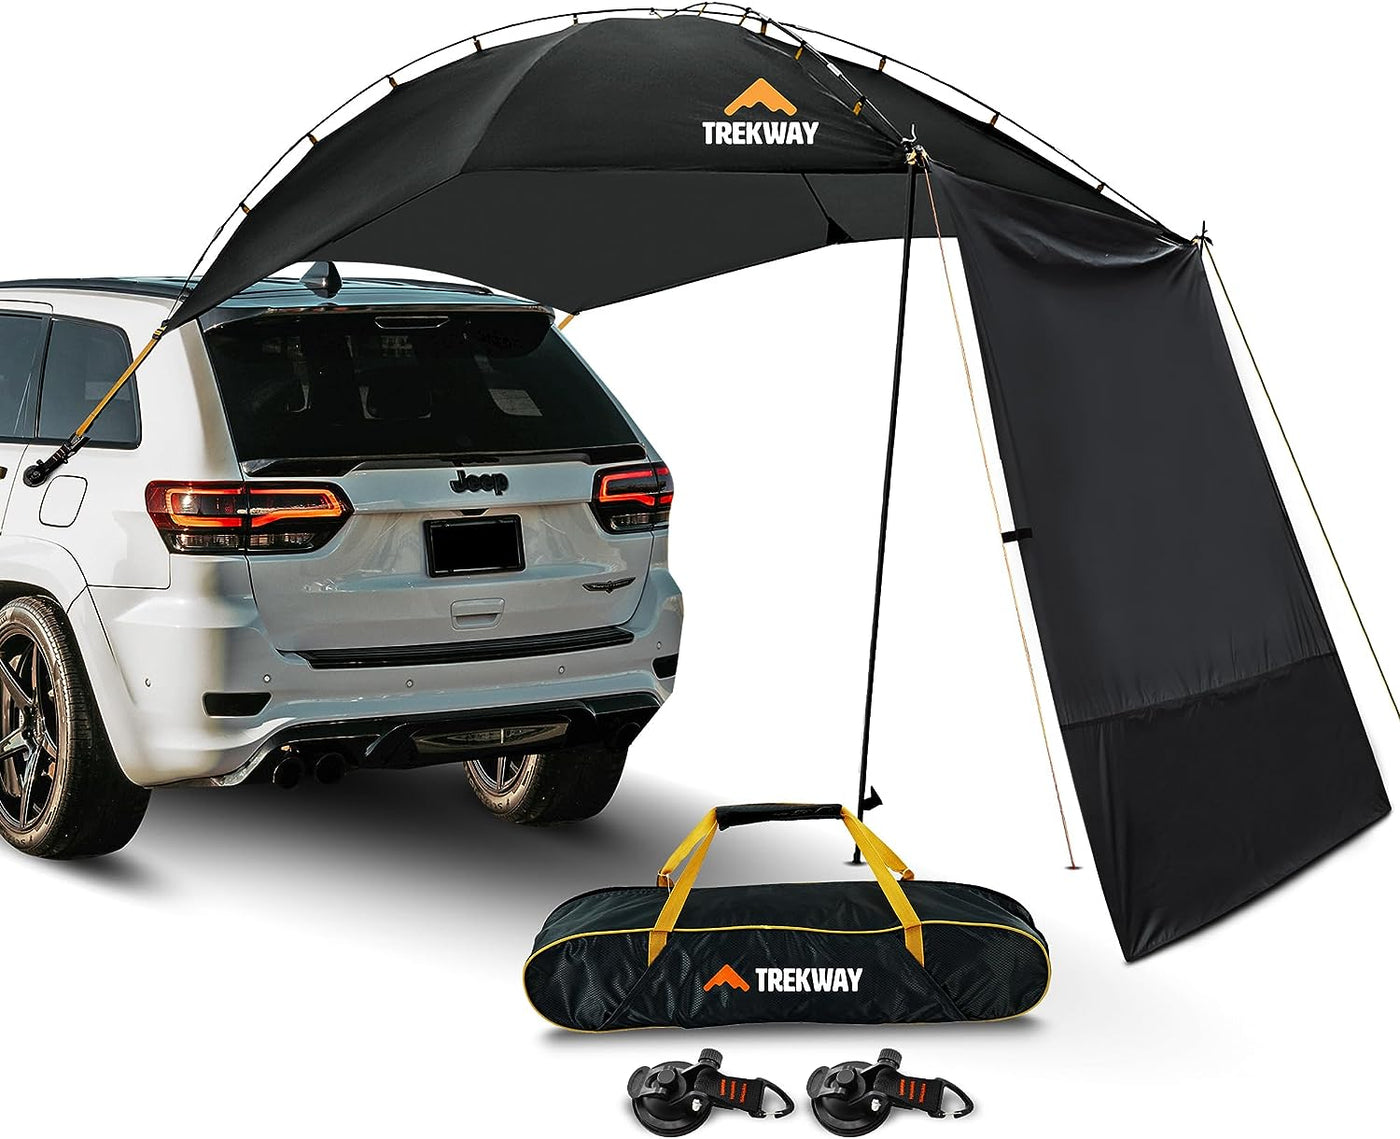 Quick Mount Car Awning & Beach Canopy